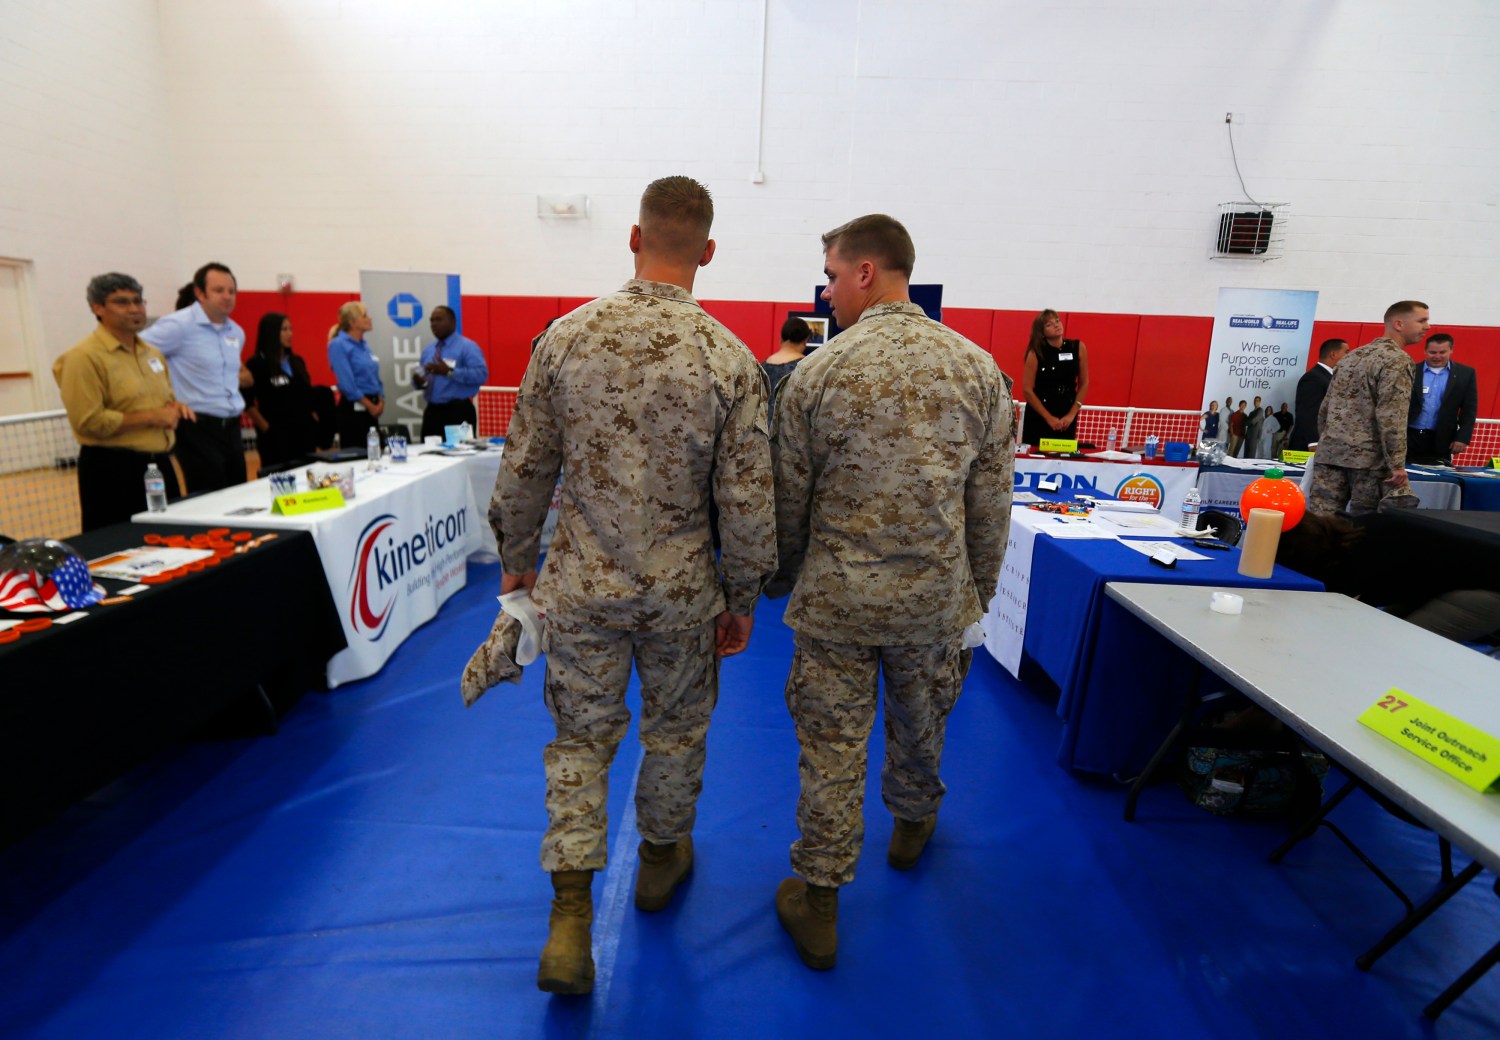 U.S. Marines attend a career and education fair at the Marine Corps Recruit Depot in San Diego